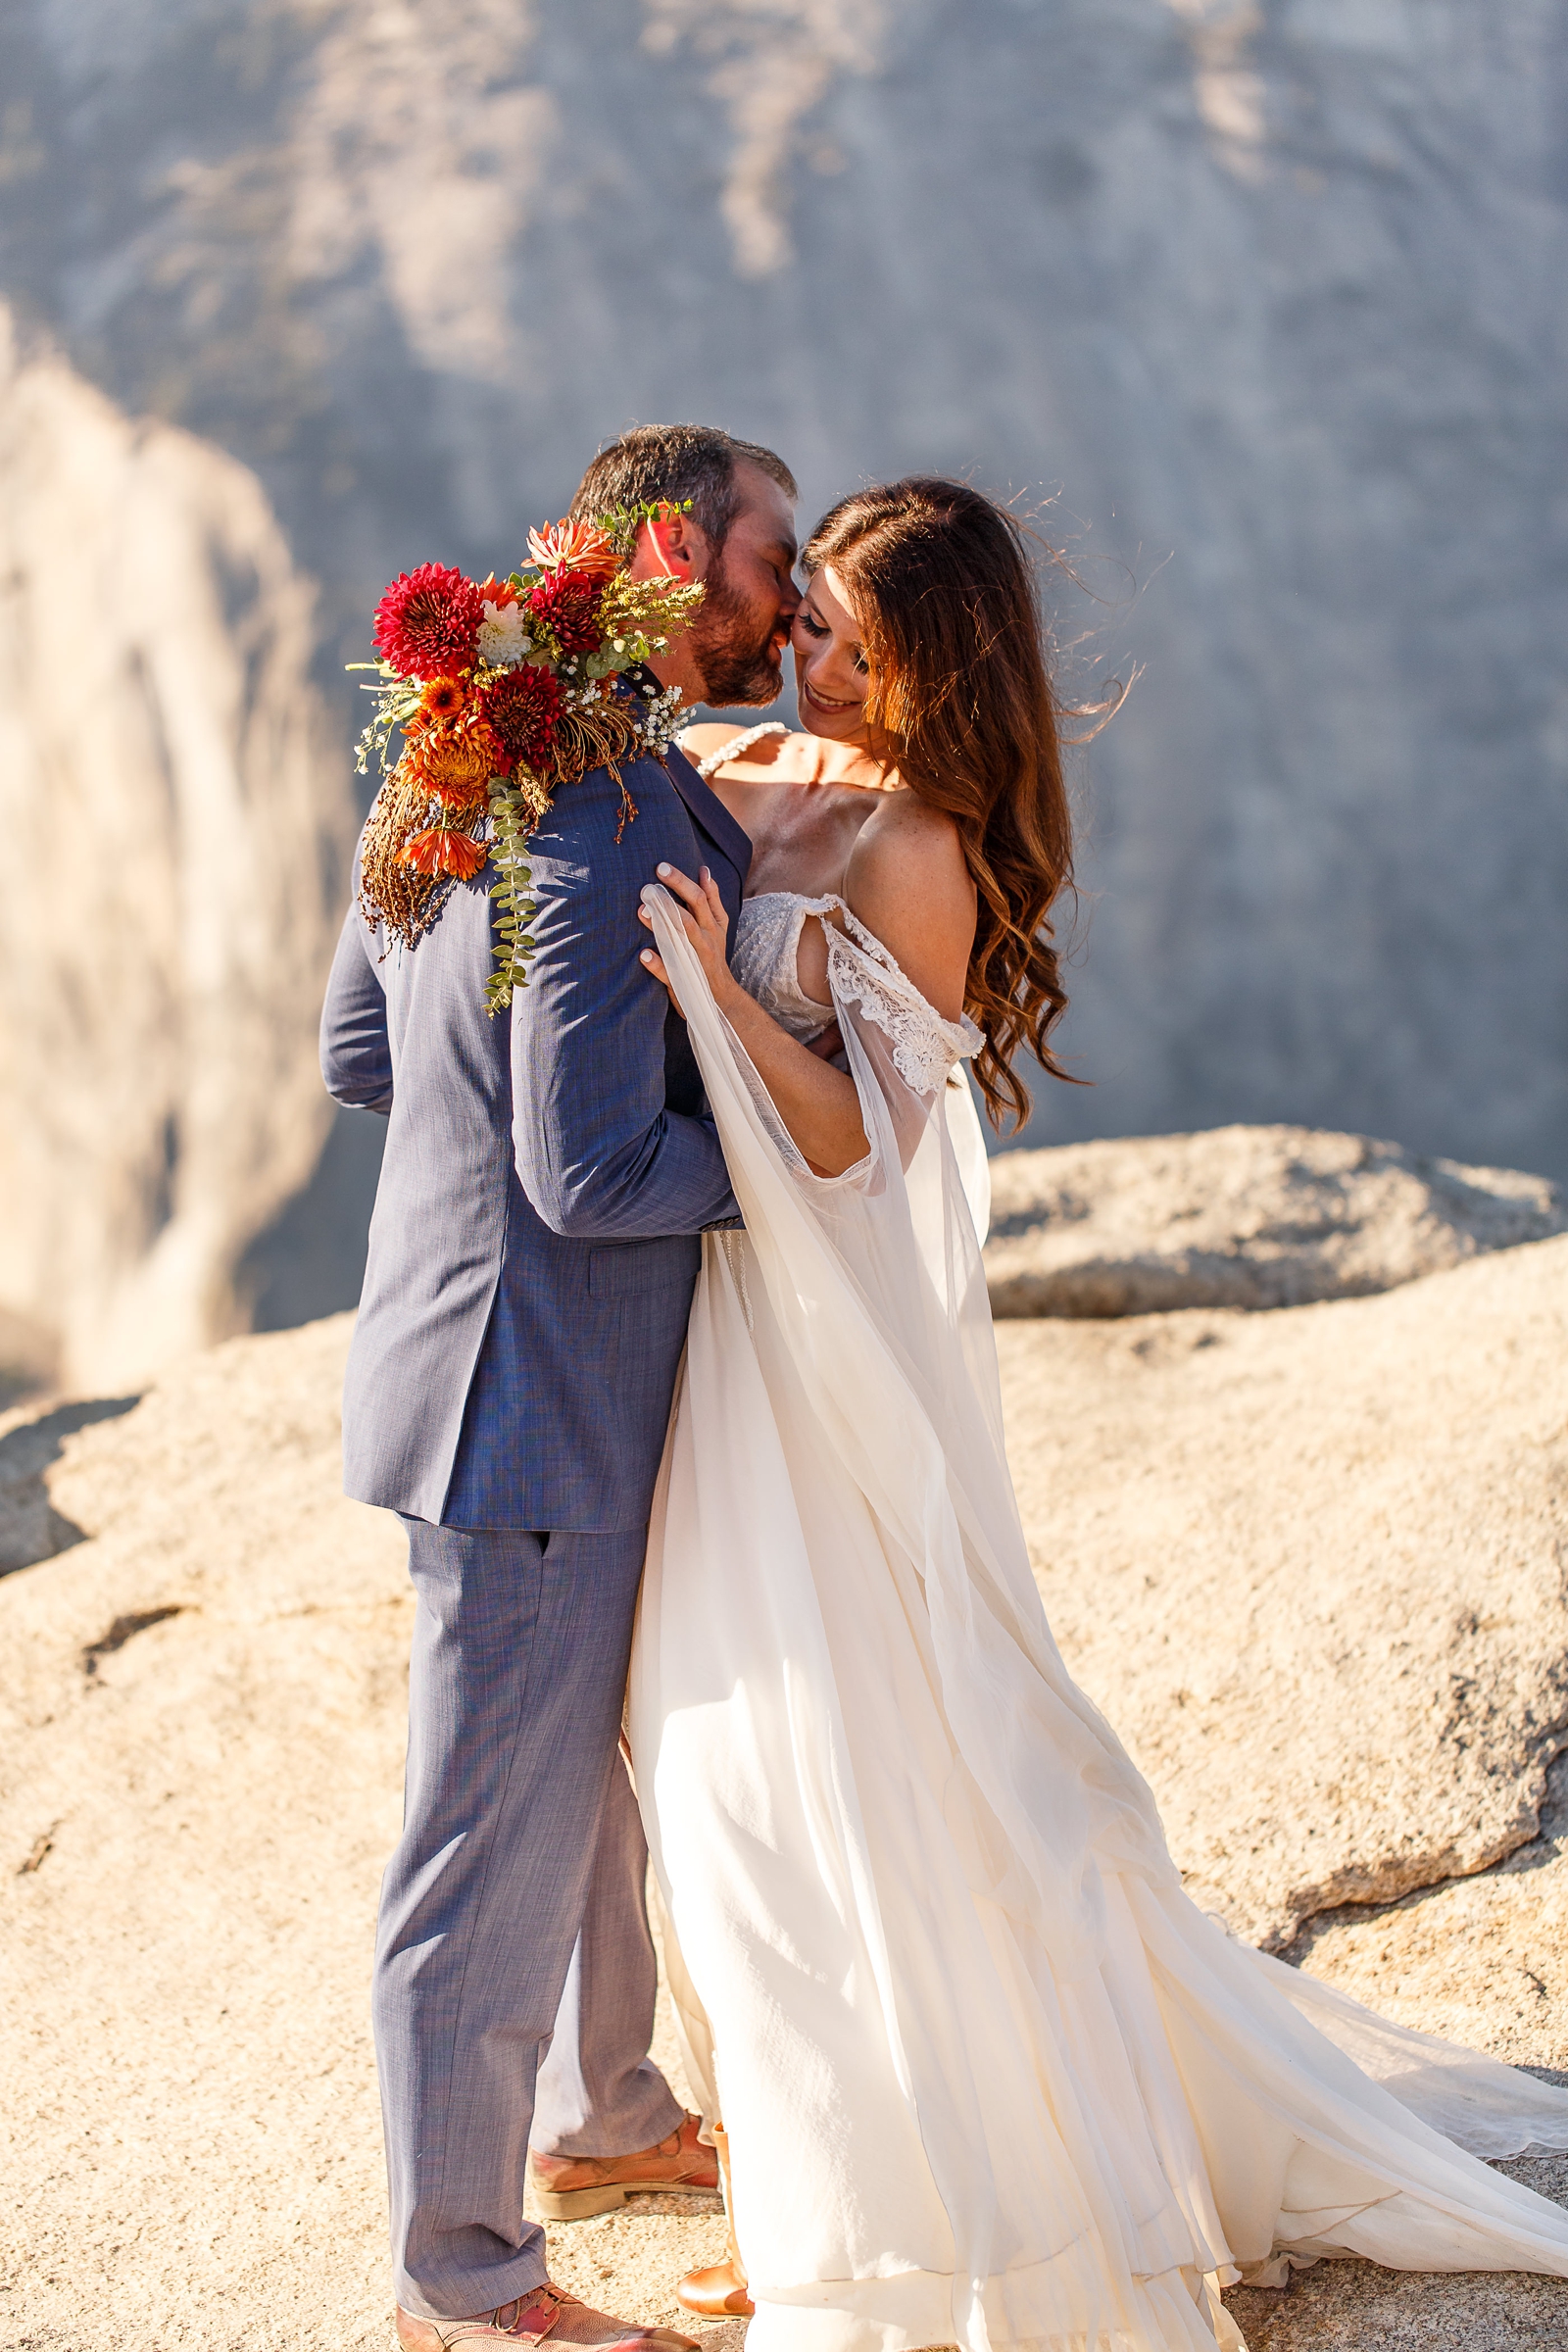 Giggling bride and groom at their Taft Point elopement.